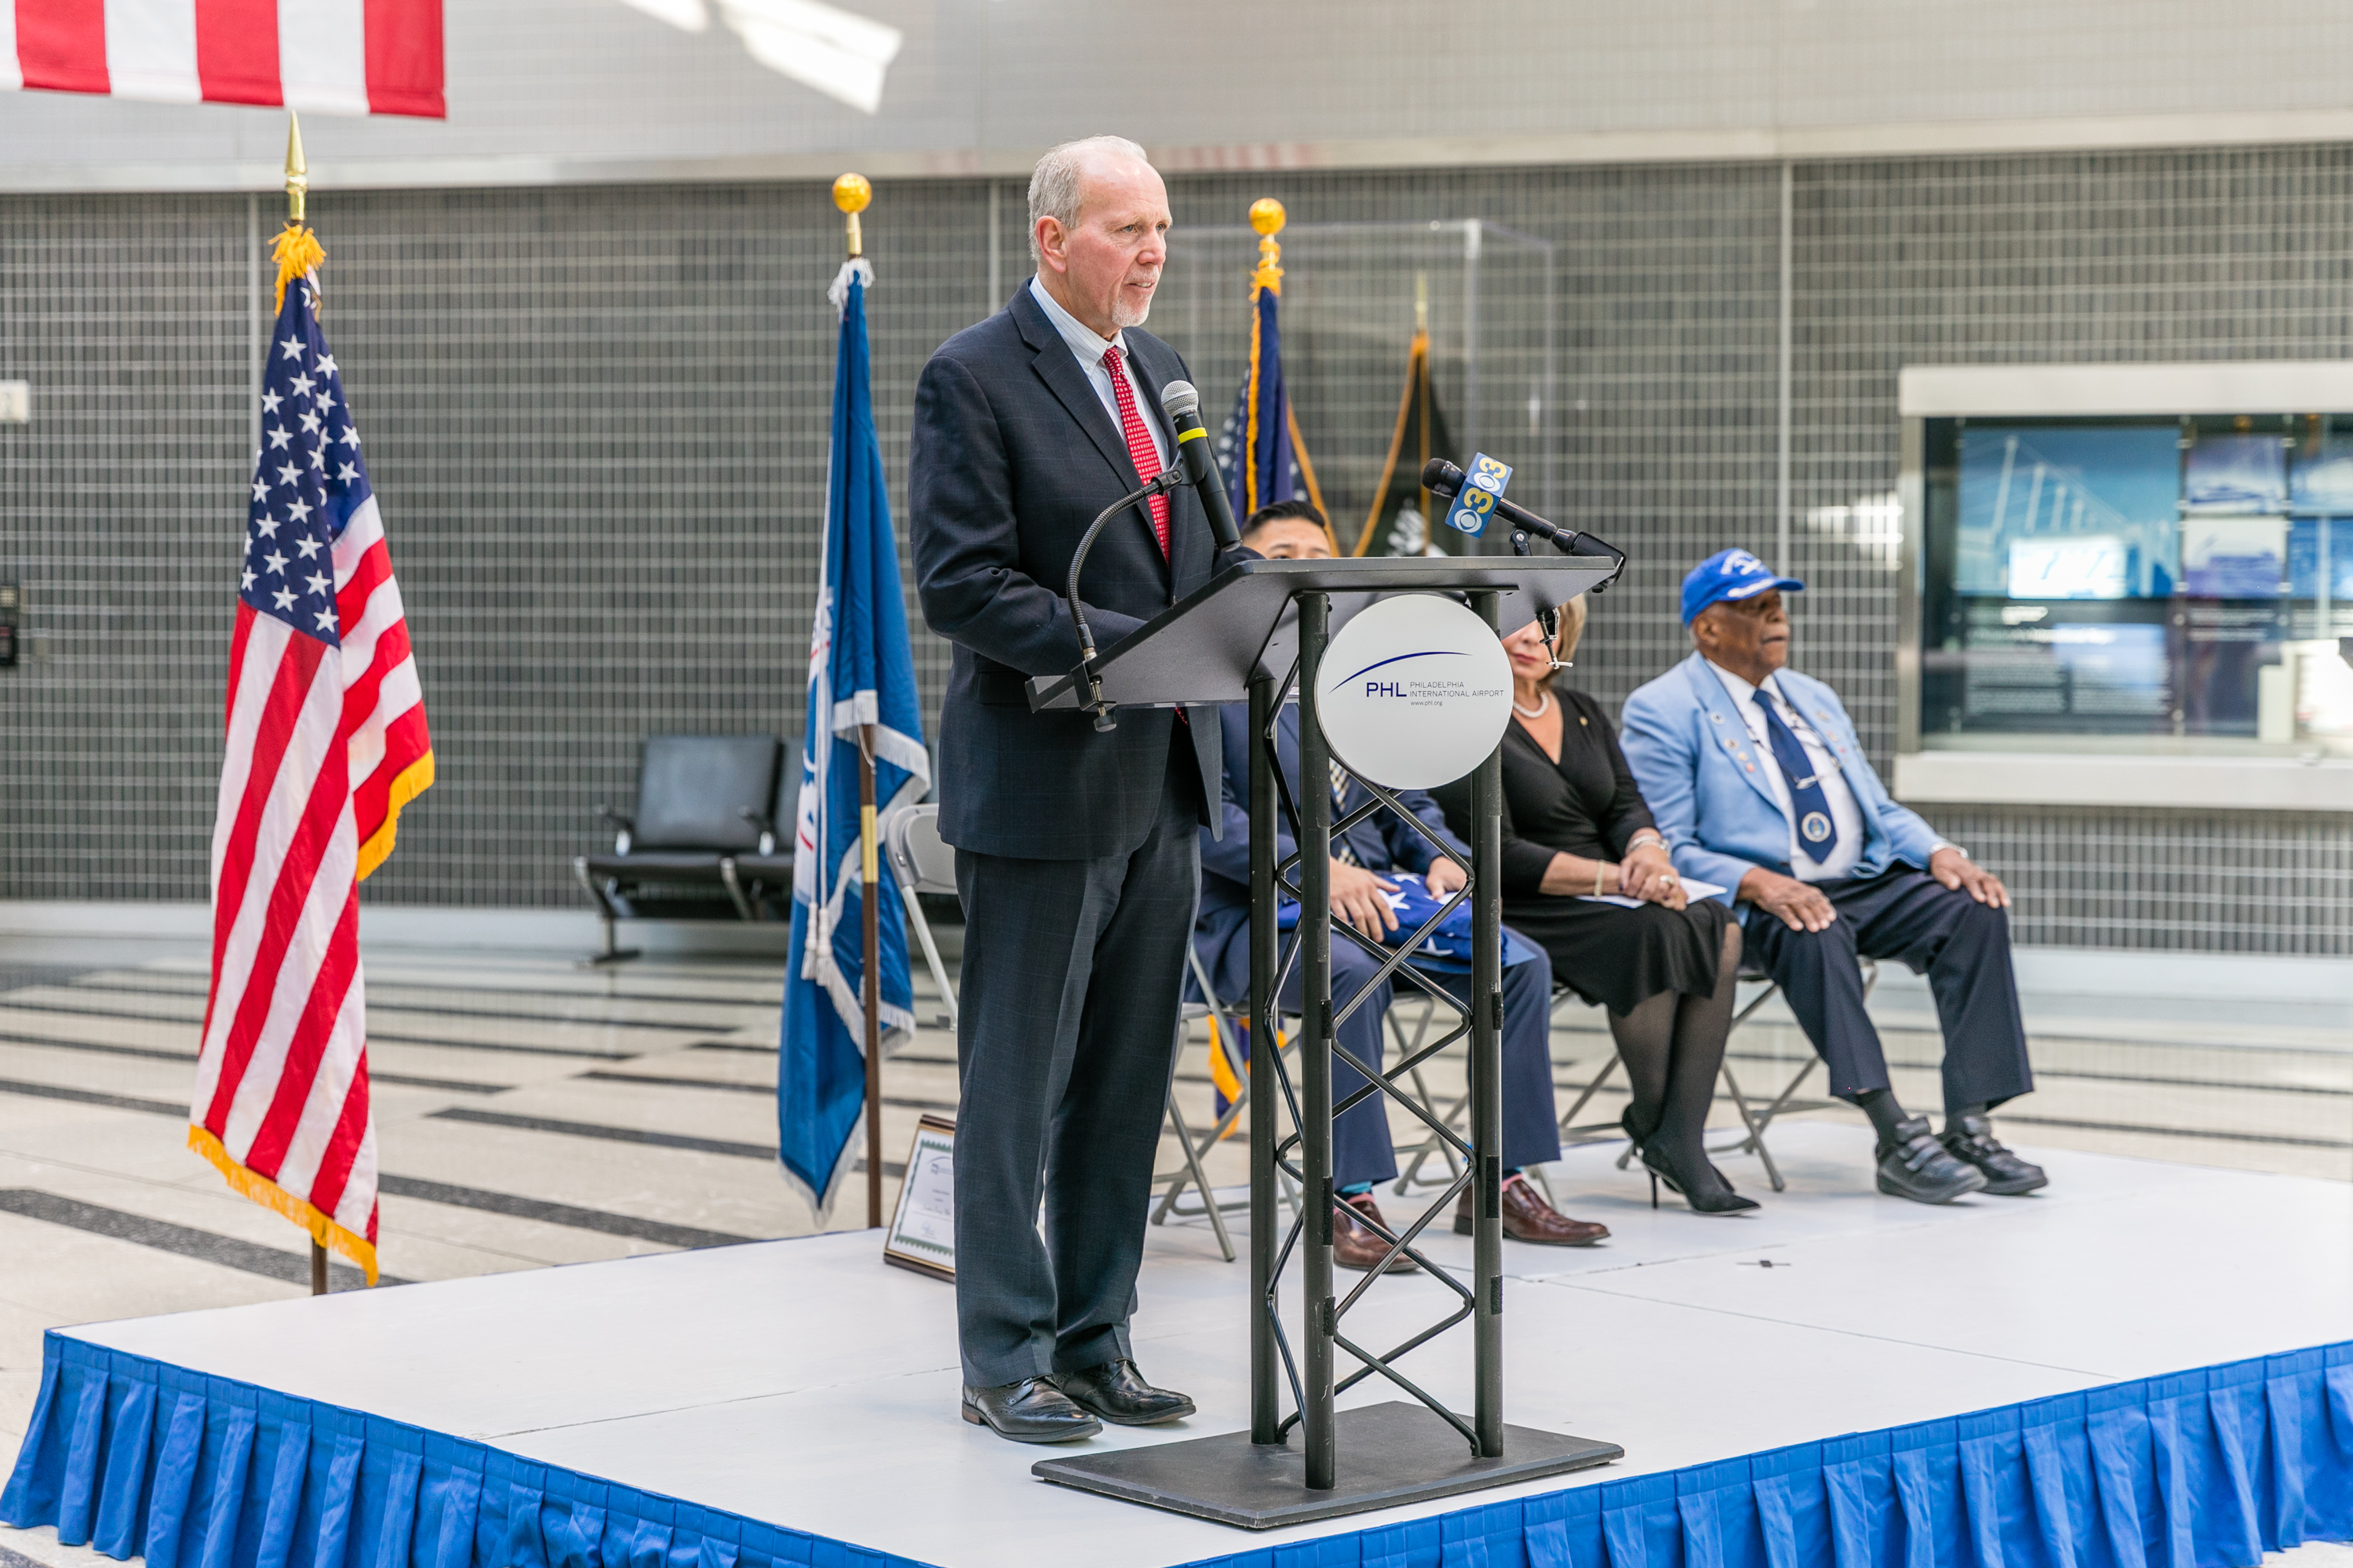 PHL COO Keith Brune, shown here at the 2019 Veteran's Day ceremony, has served on the PA Aviation Council Board Since 2011.